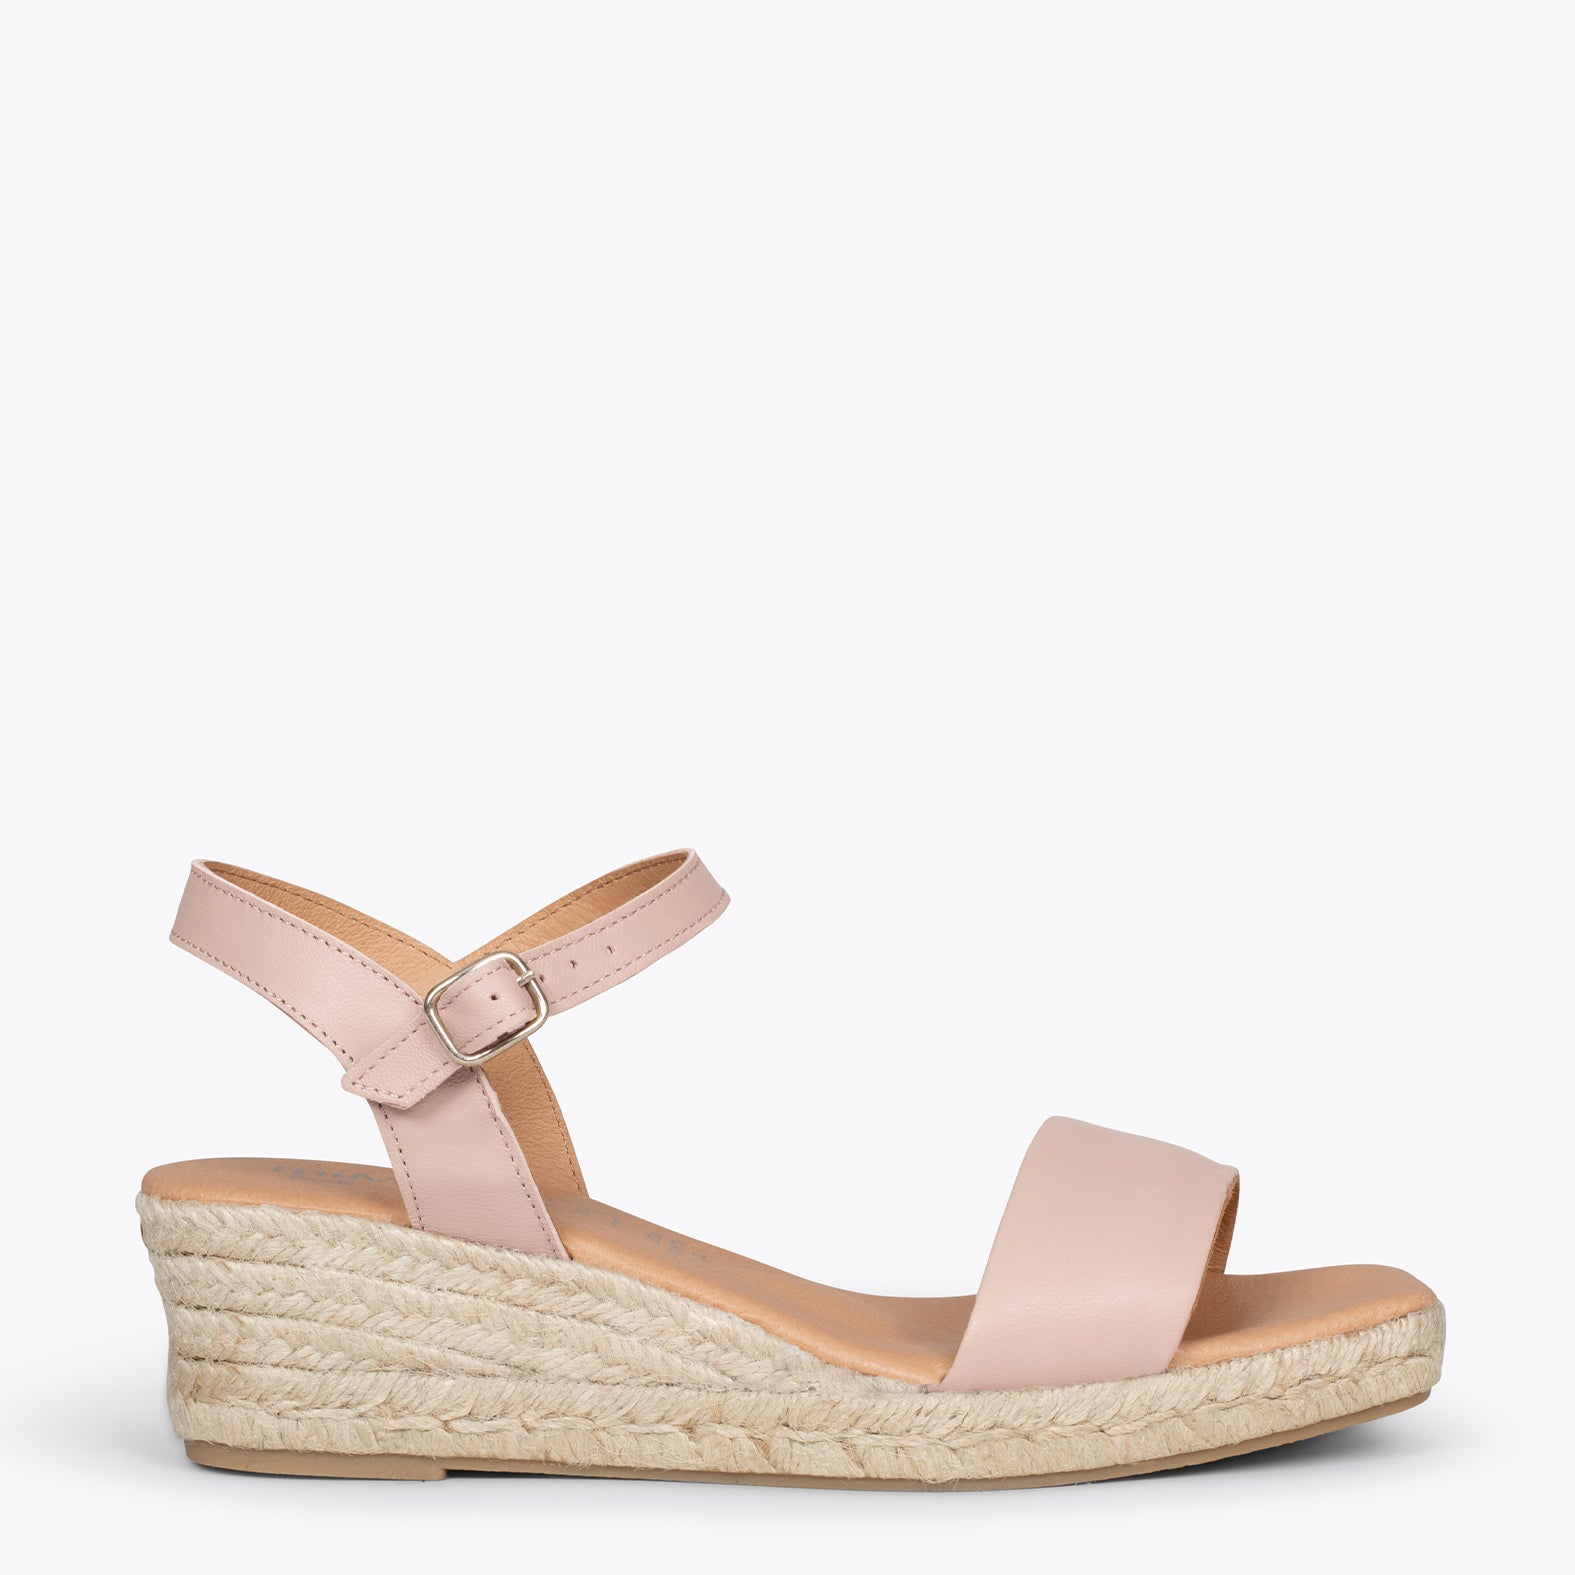 JEREZ – MAKE-UP espadrilles with comfortable wedge